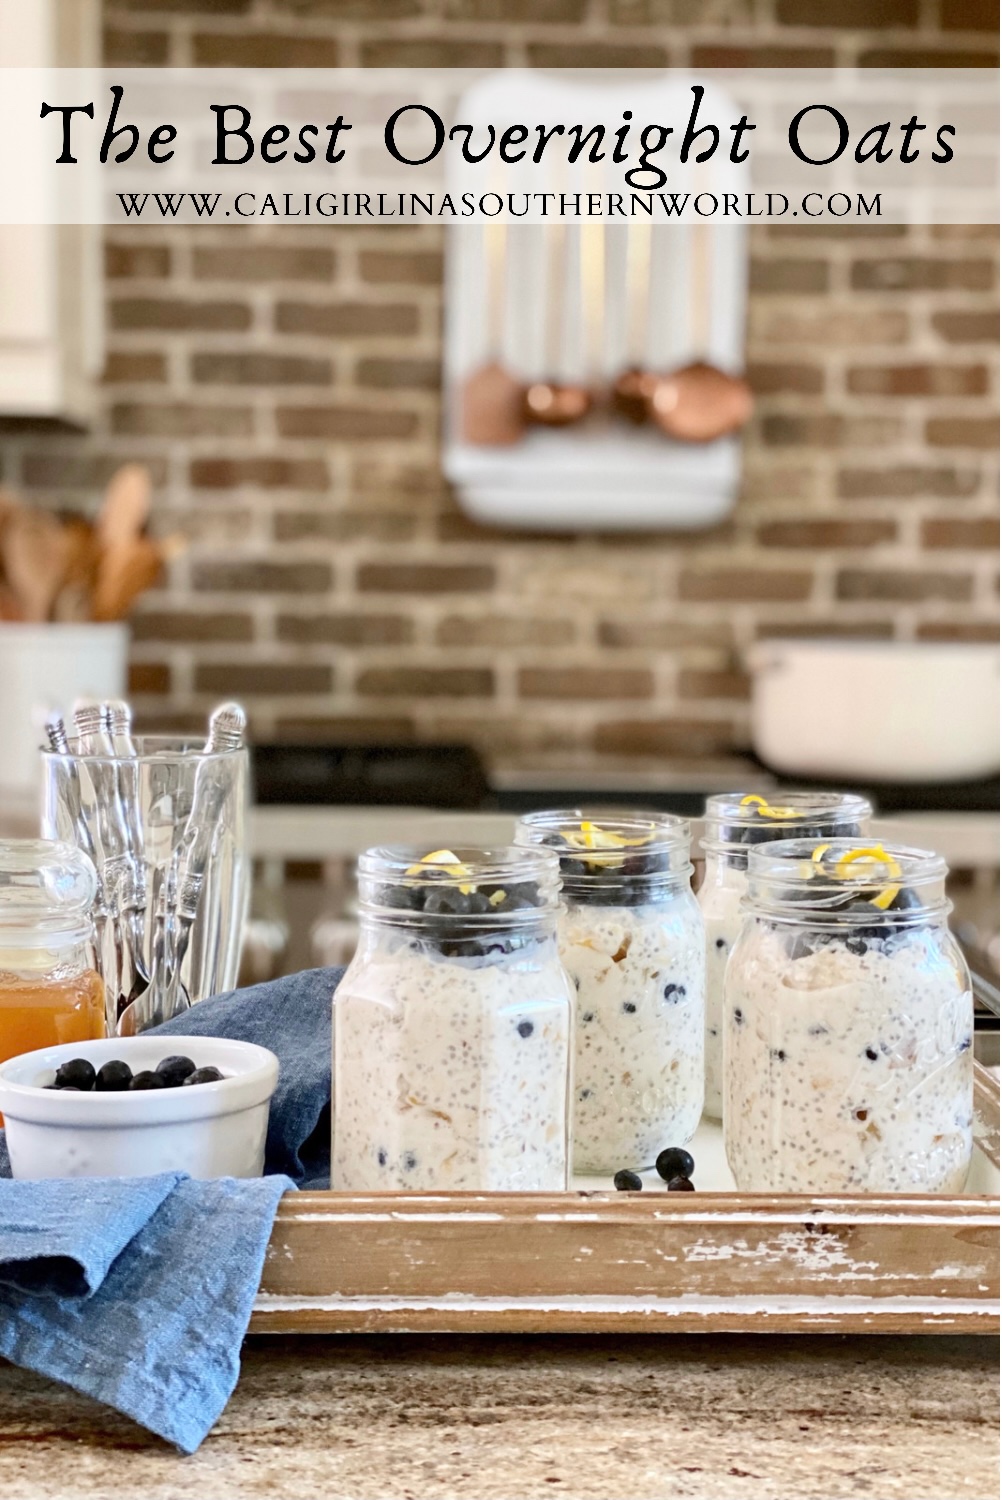 Pin for Pinterest of the best overnight oats on a tray in the kitchen with honey and blueberries.